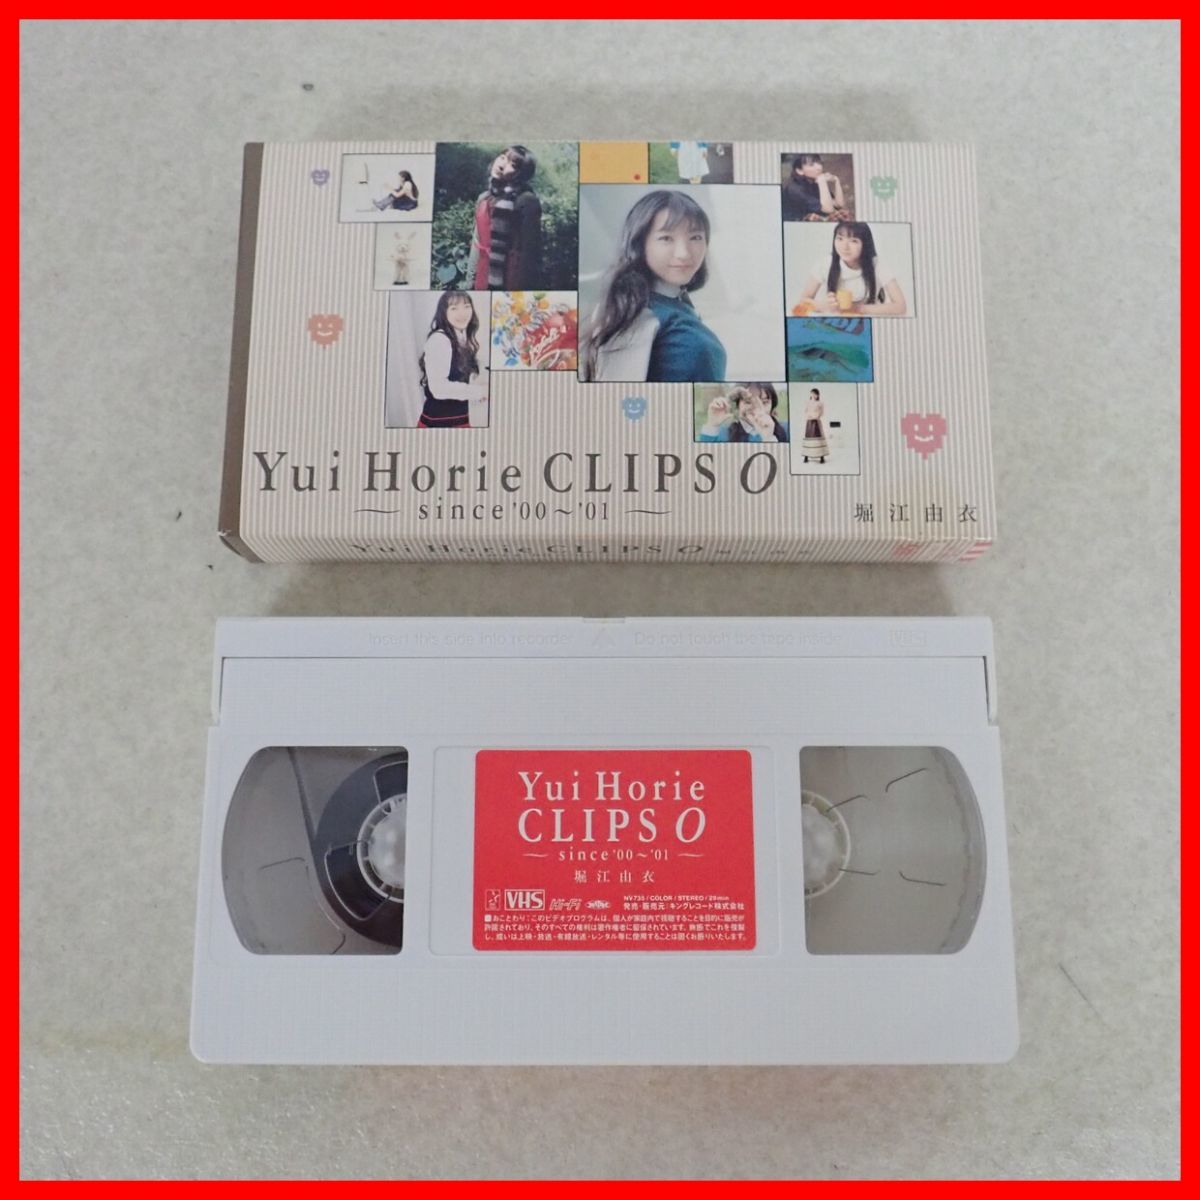 *VHS Horie ..Yui Horie CLIPS 0 since*00*~01 King record [10